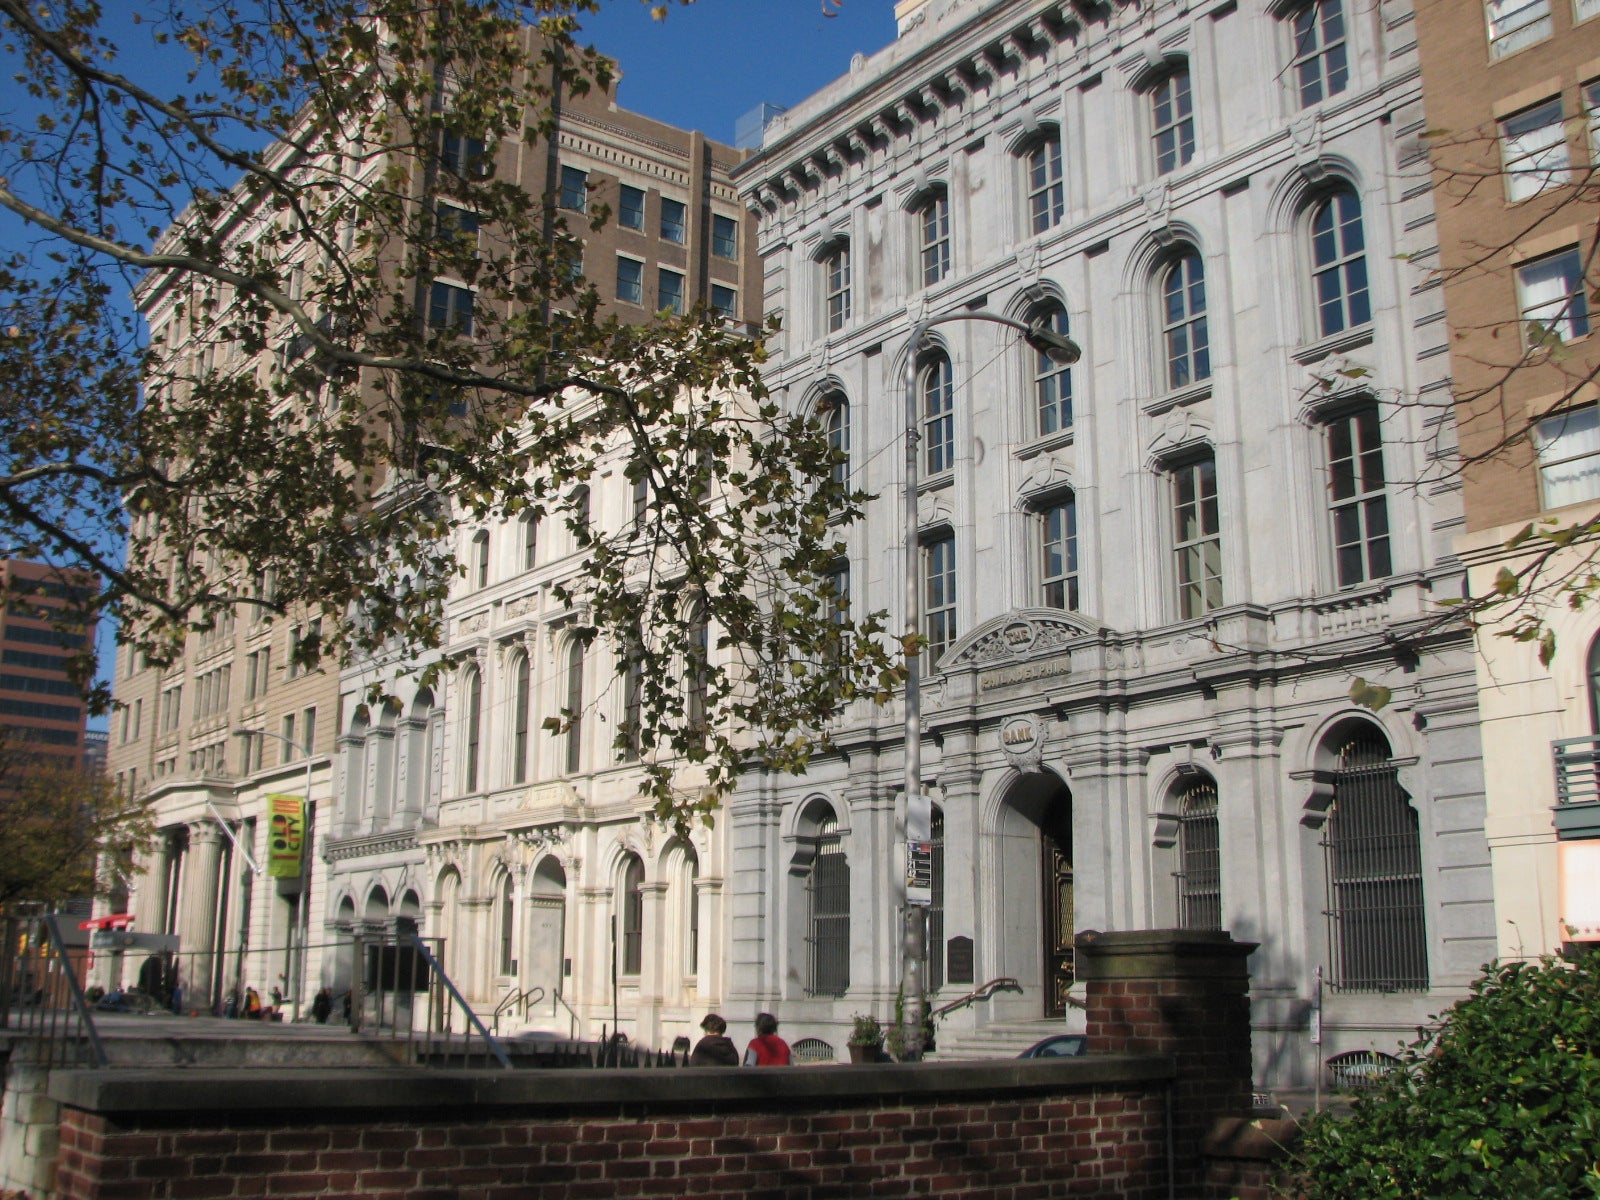 The buildings along the 400 block of Chestnut Street made up a 19th century Bank Row.